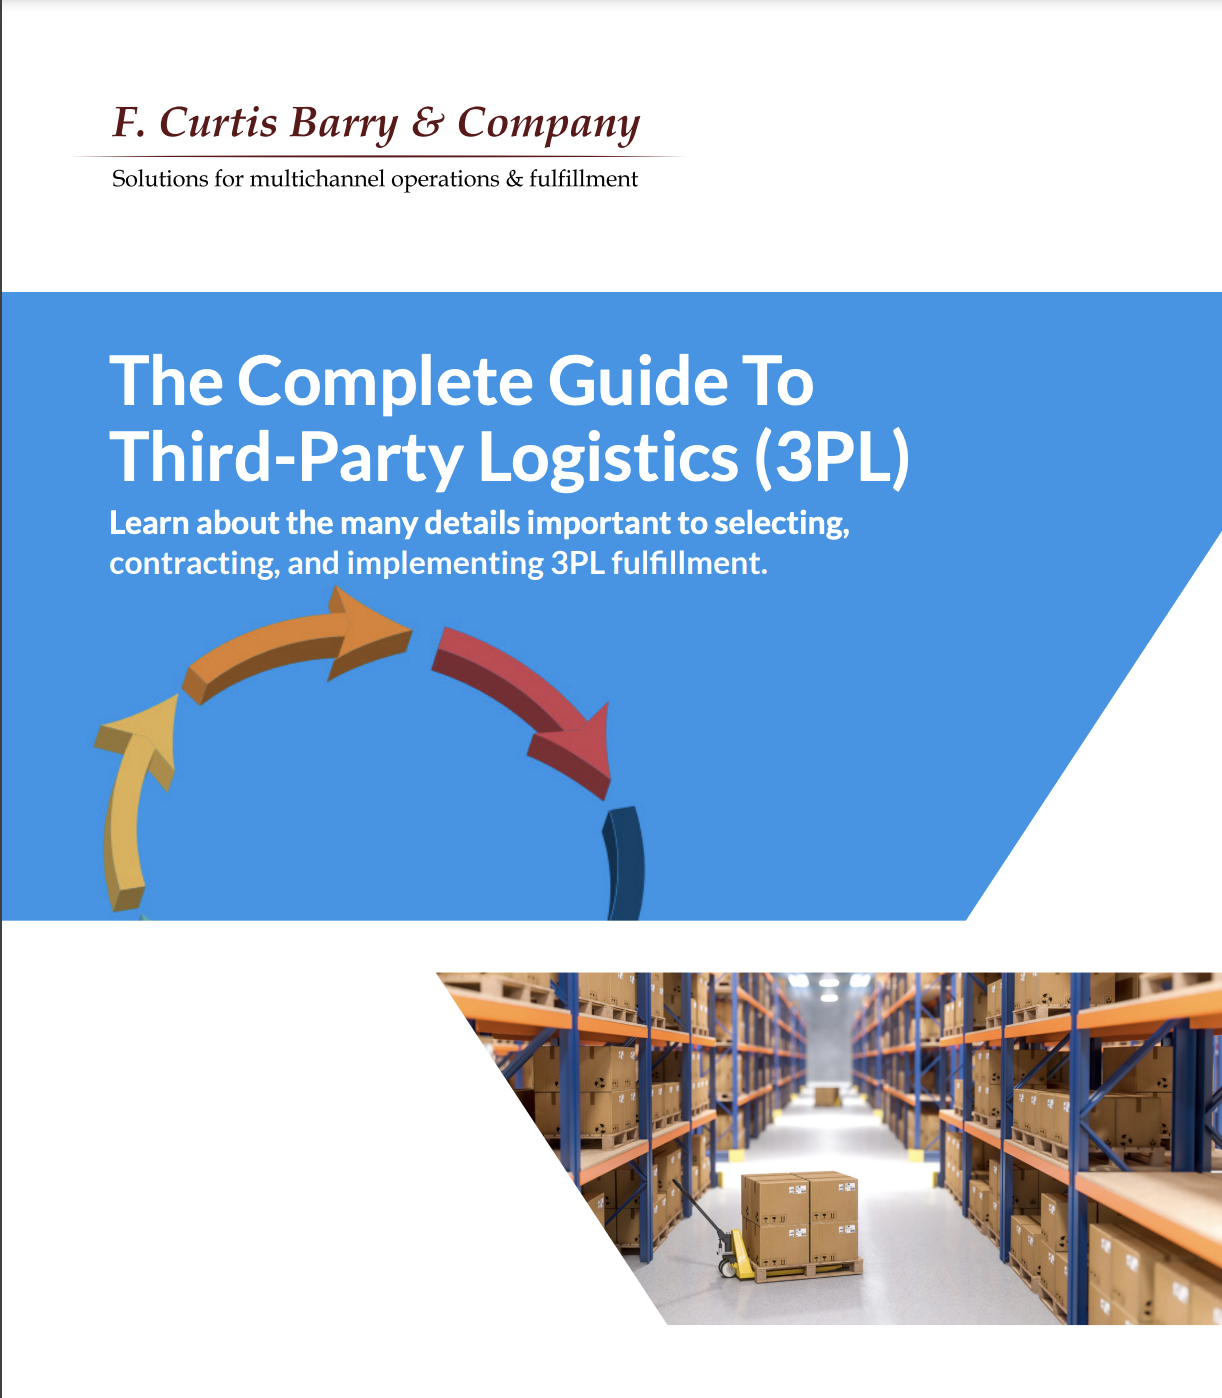 The Complete Guide to Third-Party Logistics (3PL)